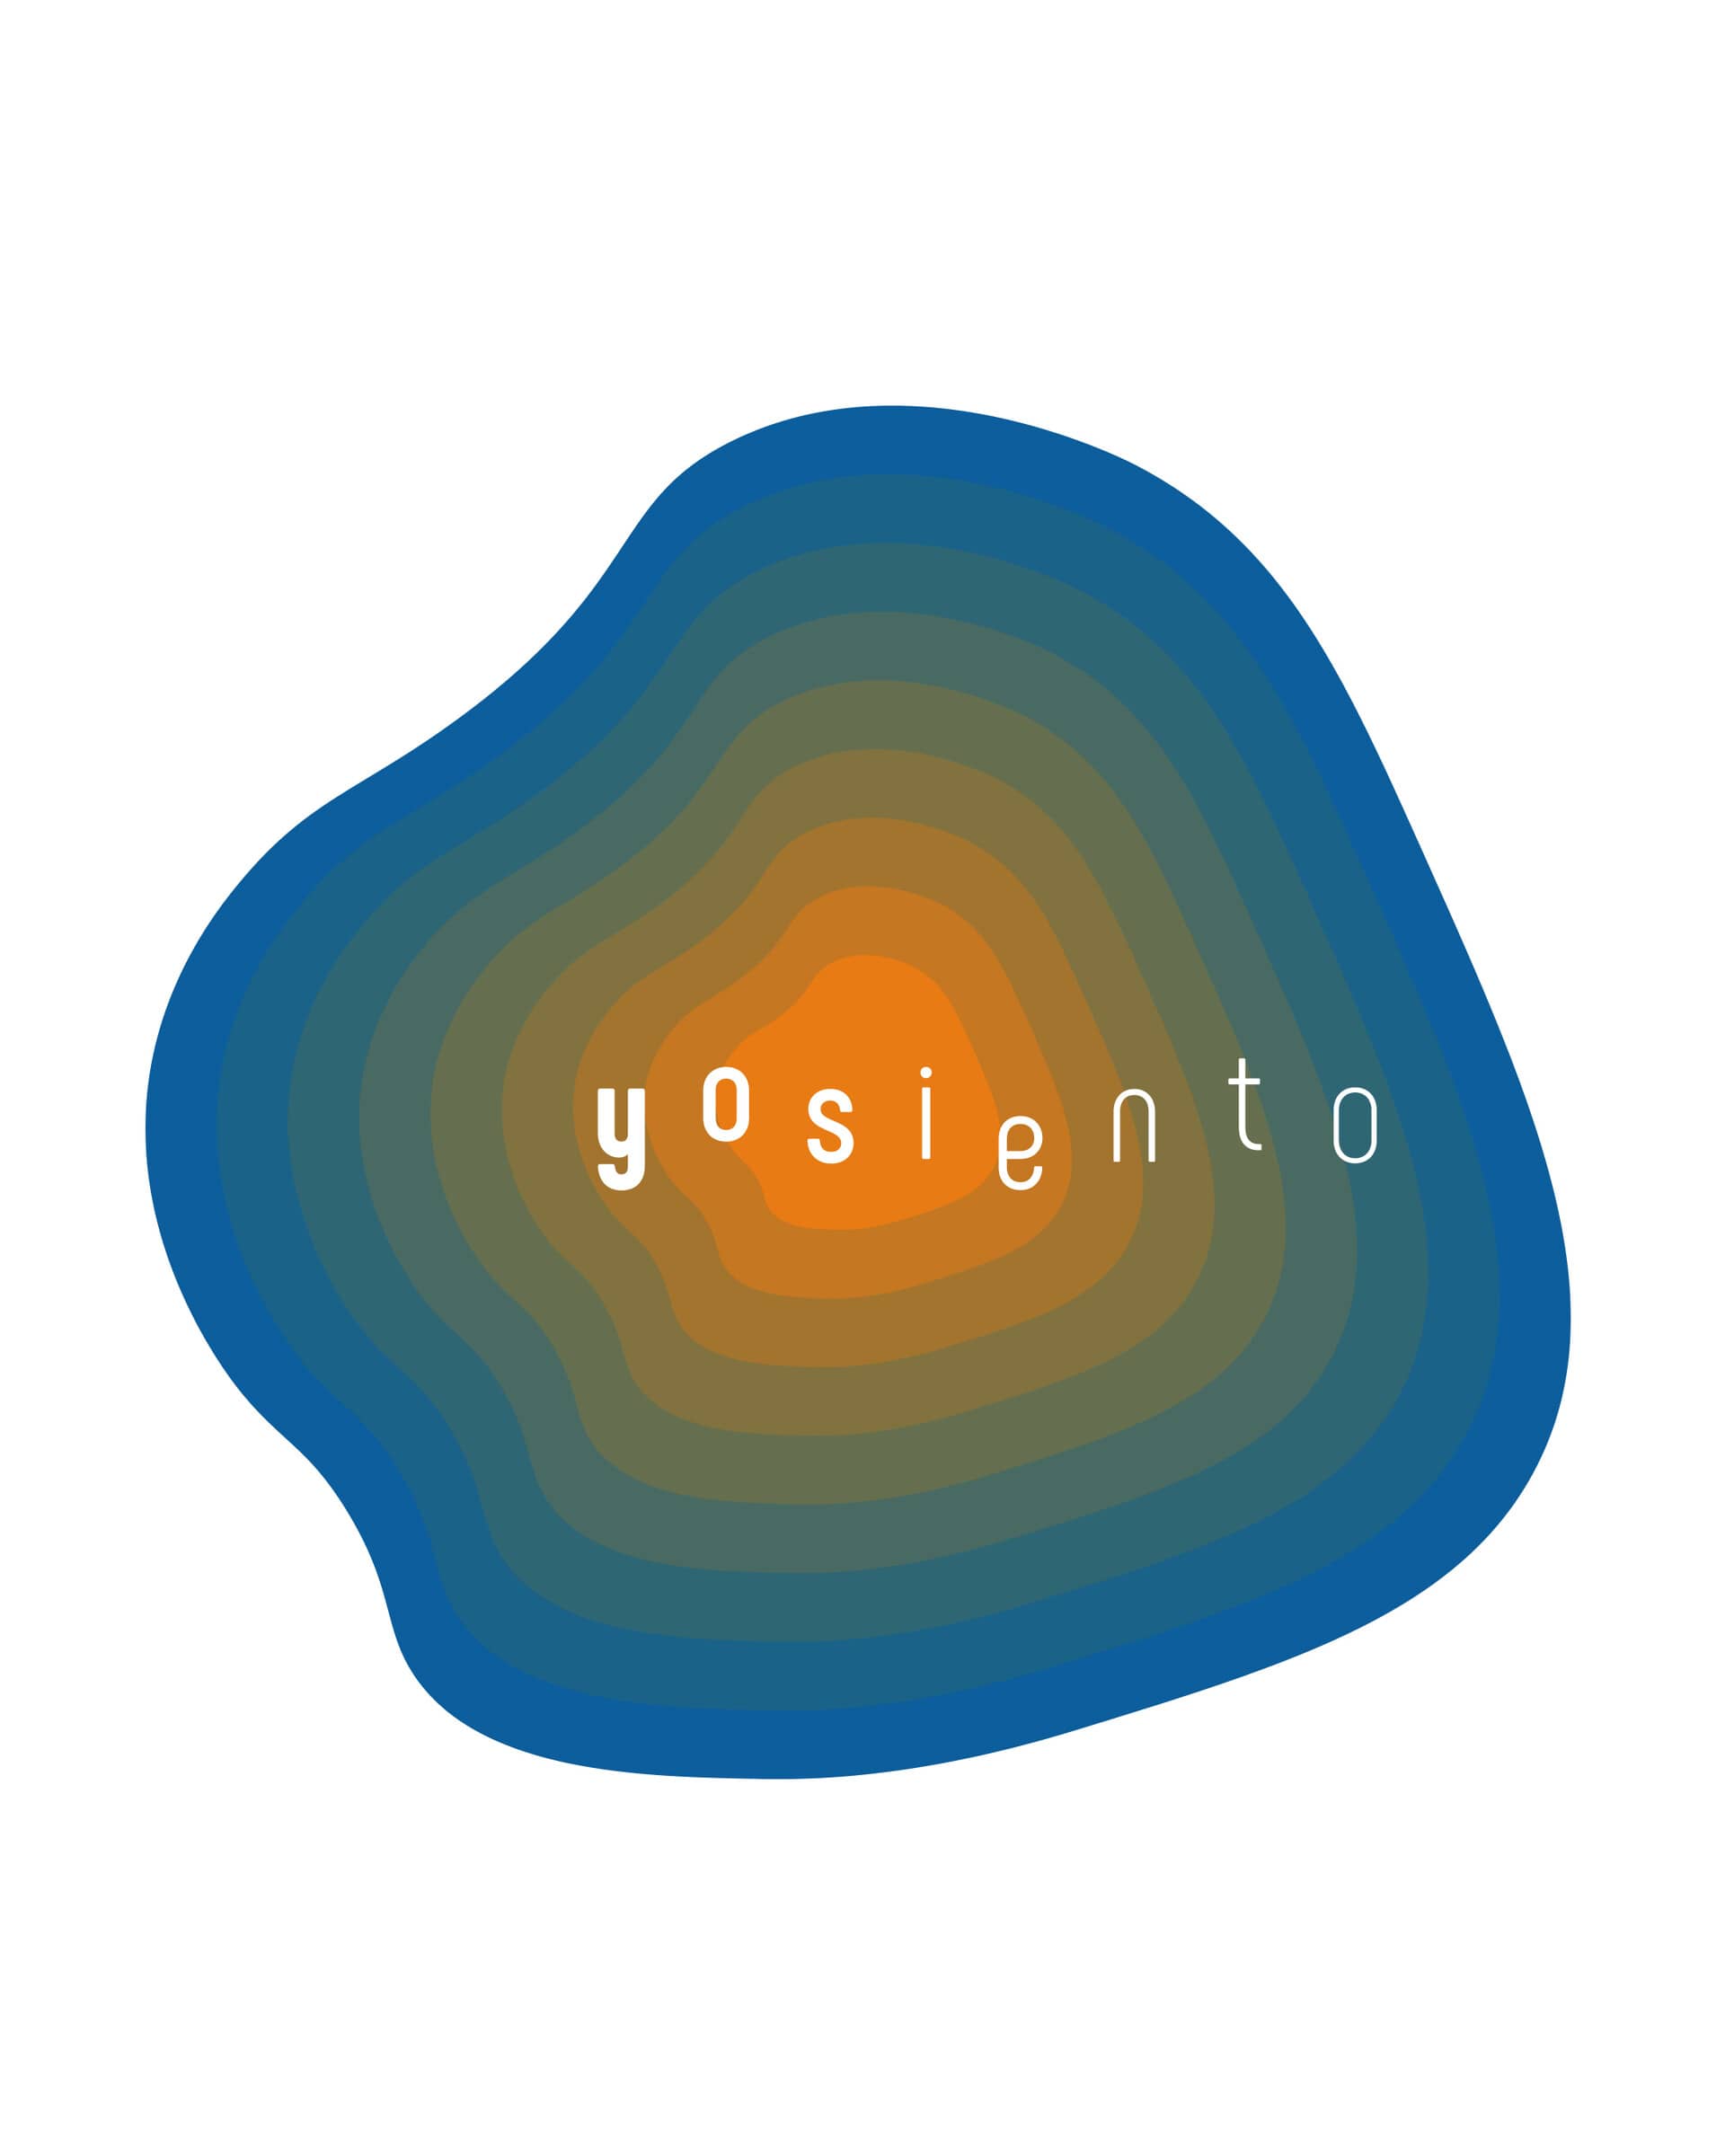 Yosiento logo in a orange-to-blue organic shape container